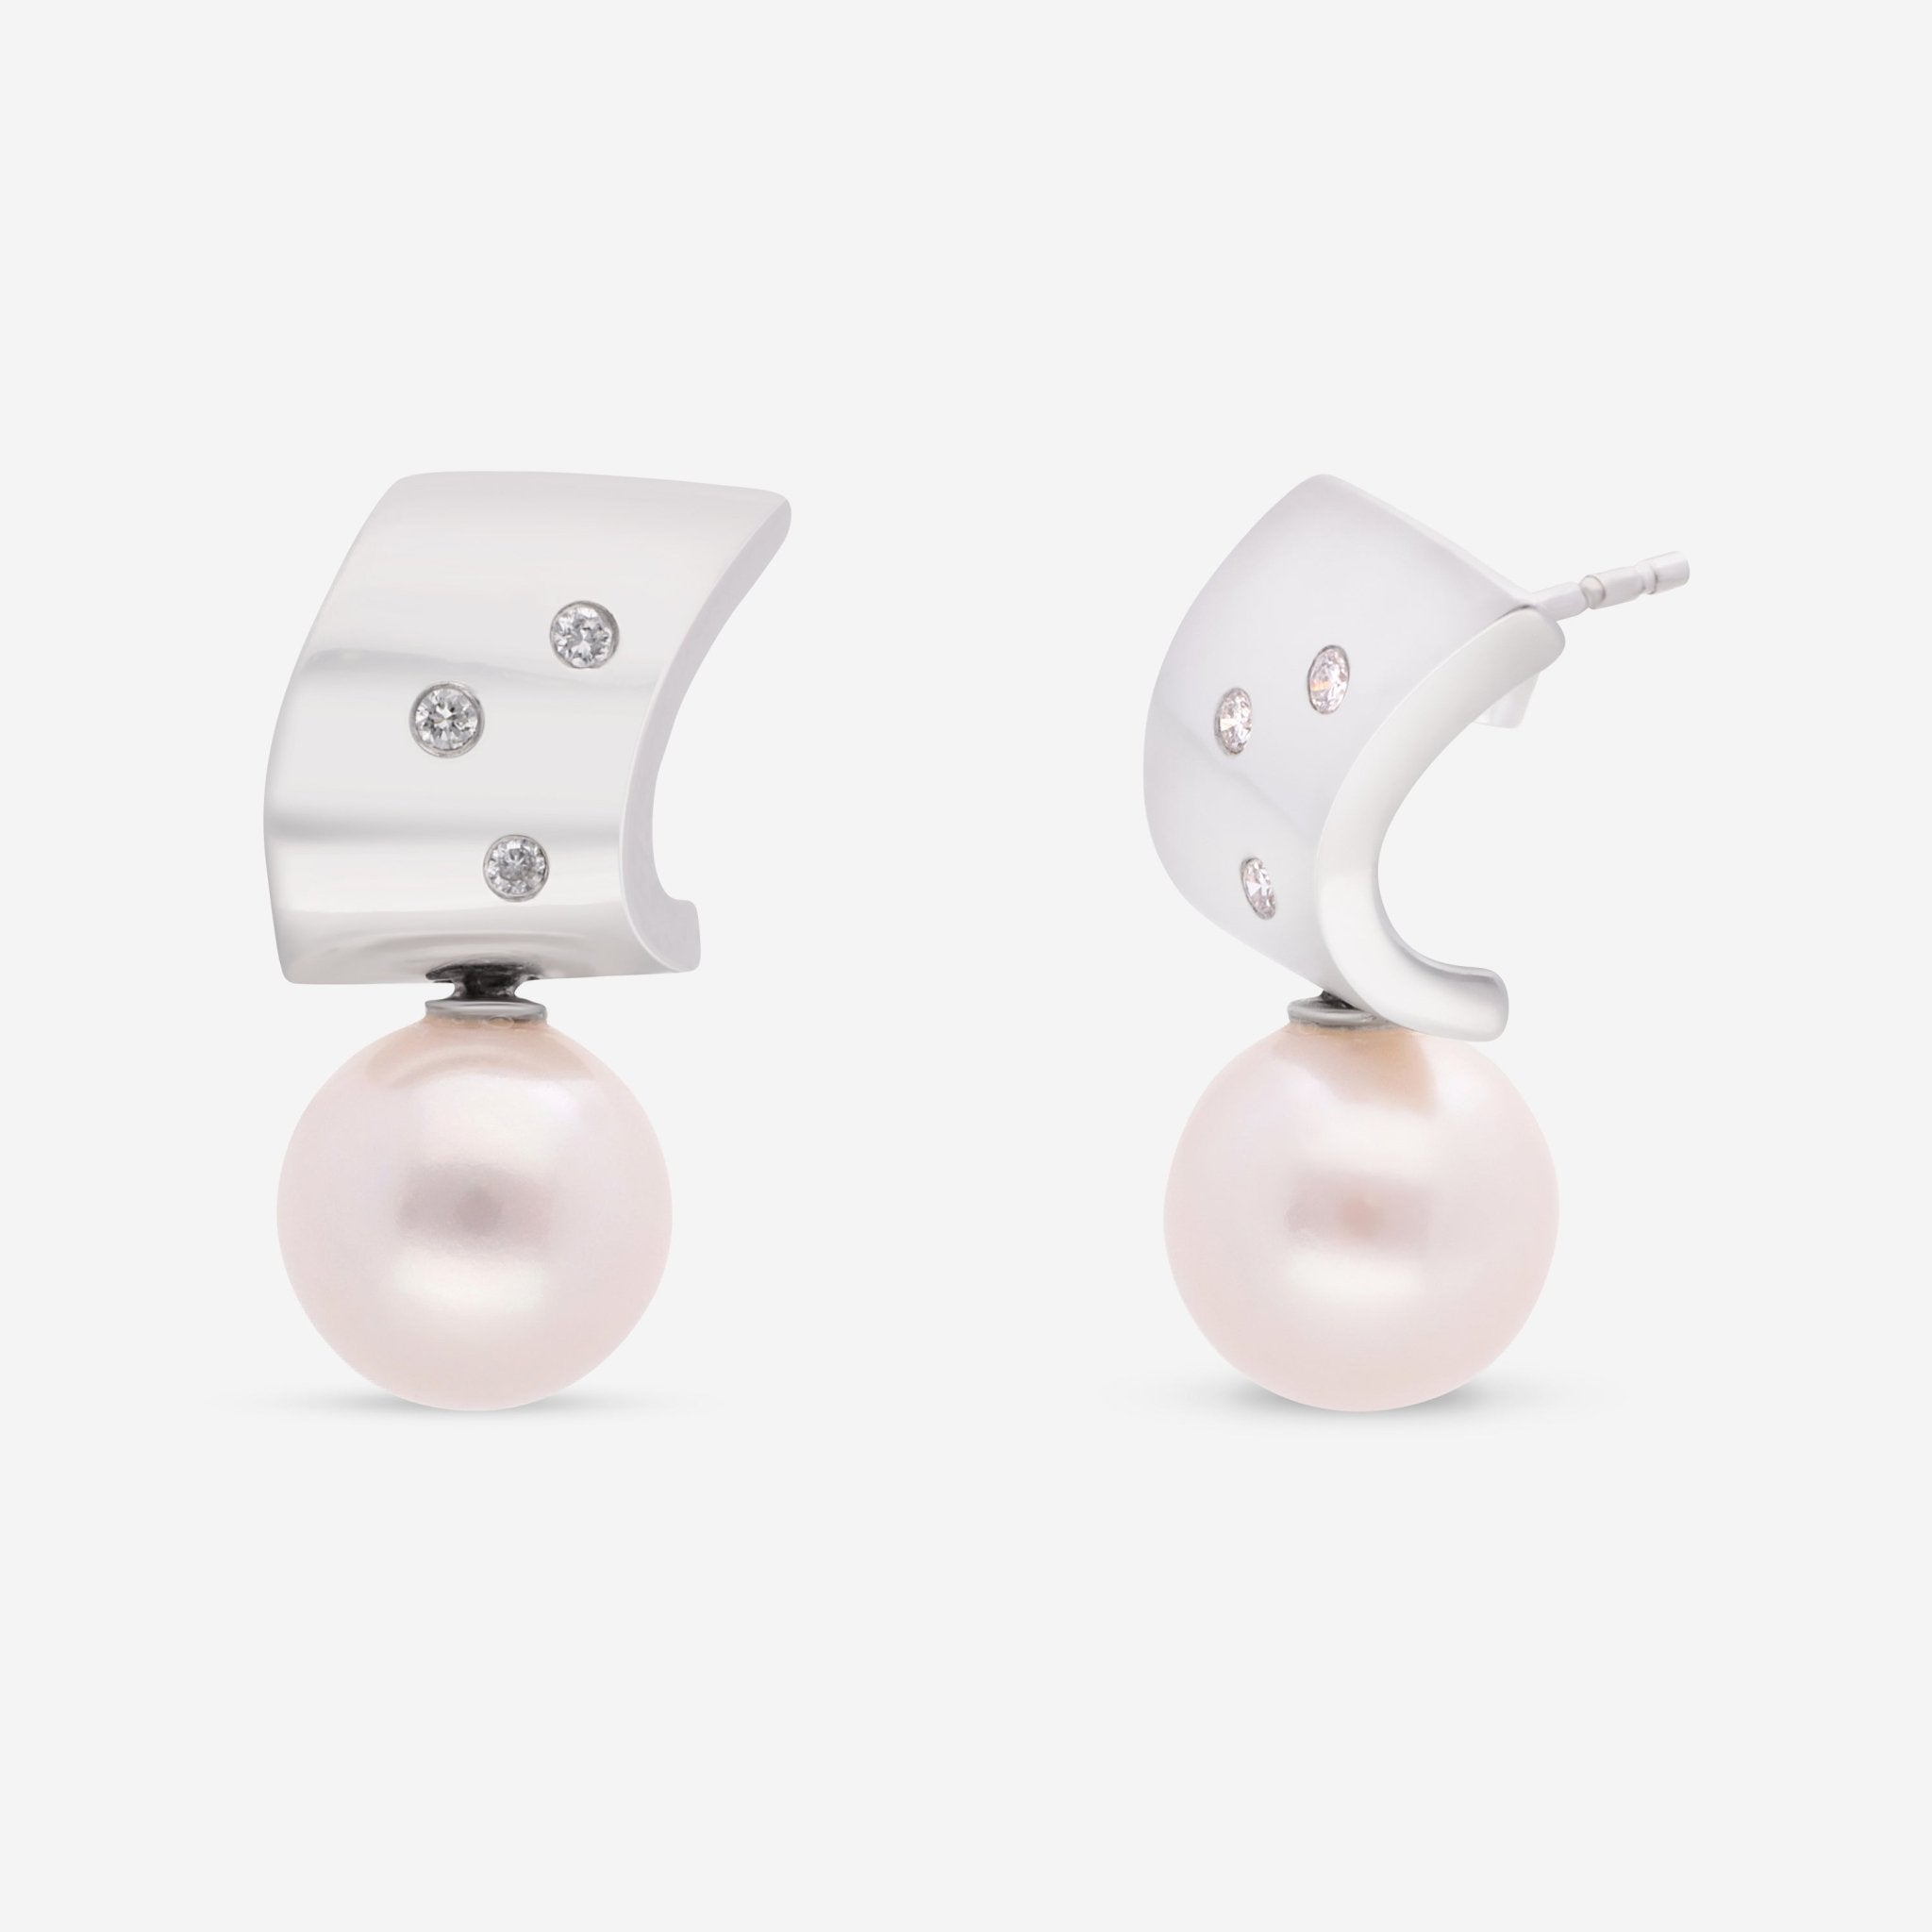 London Pearl 18K White Gold Diamond and South Sea Pearls 10.8 - 11mm Drop Earrings E4759SS - THE SOLIST - London Pearl